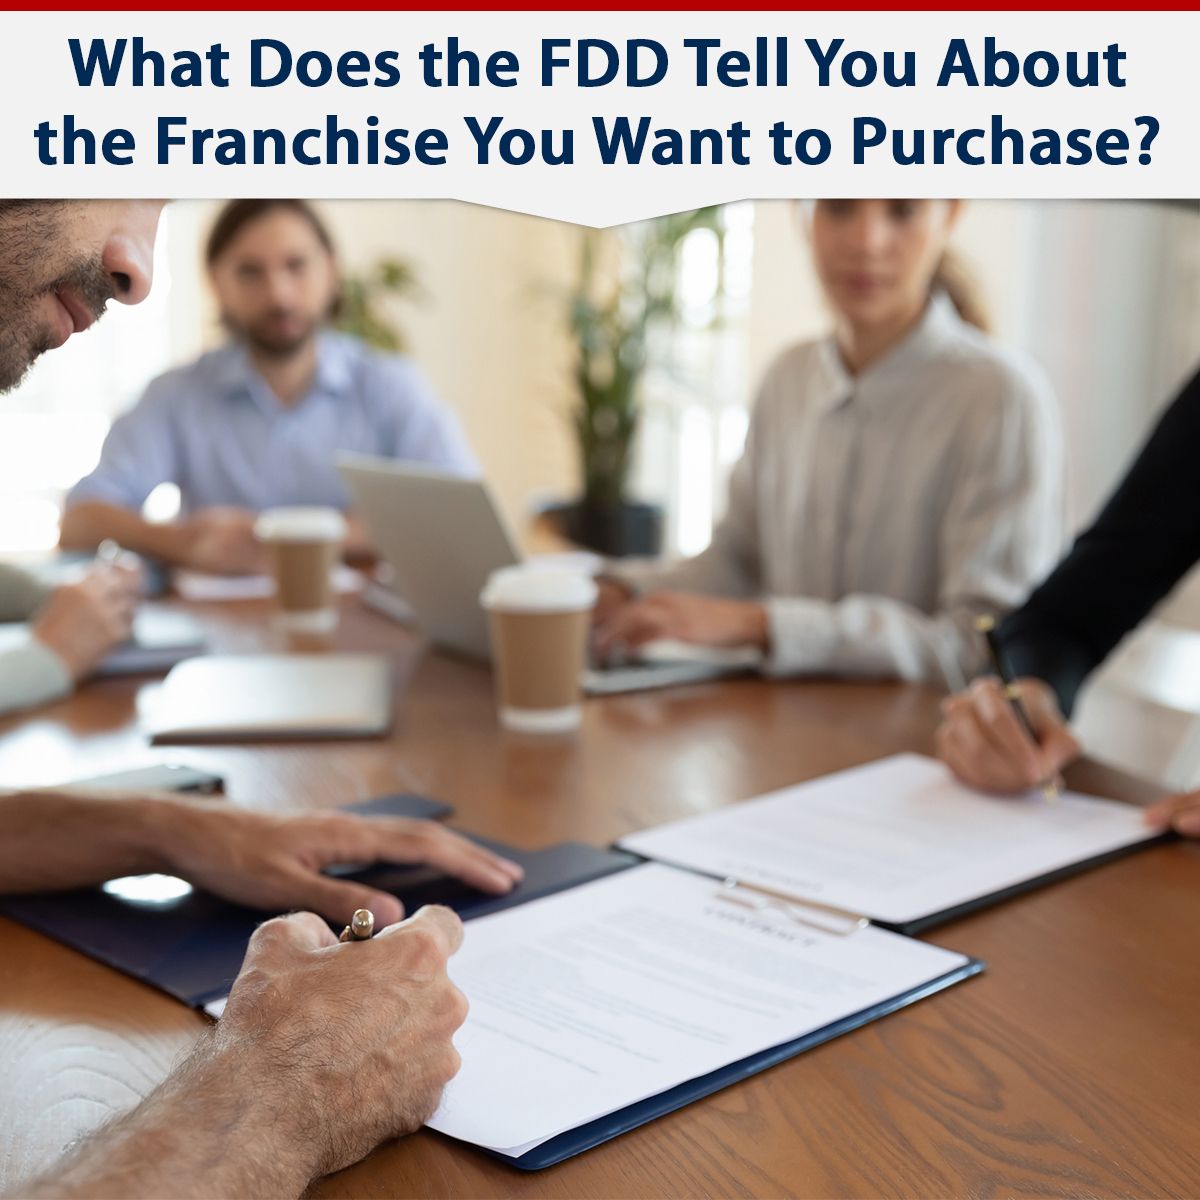 What Does the FDD Tell You About the Franchise You Want to Purchase?